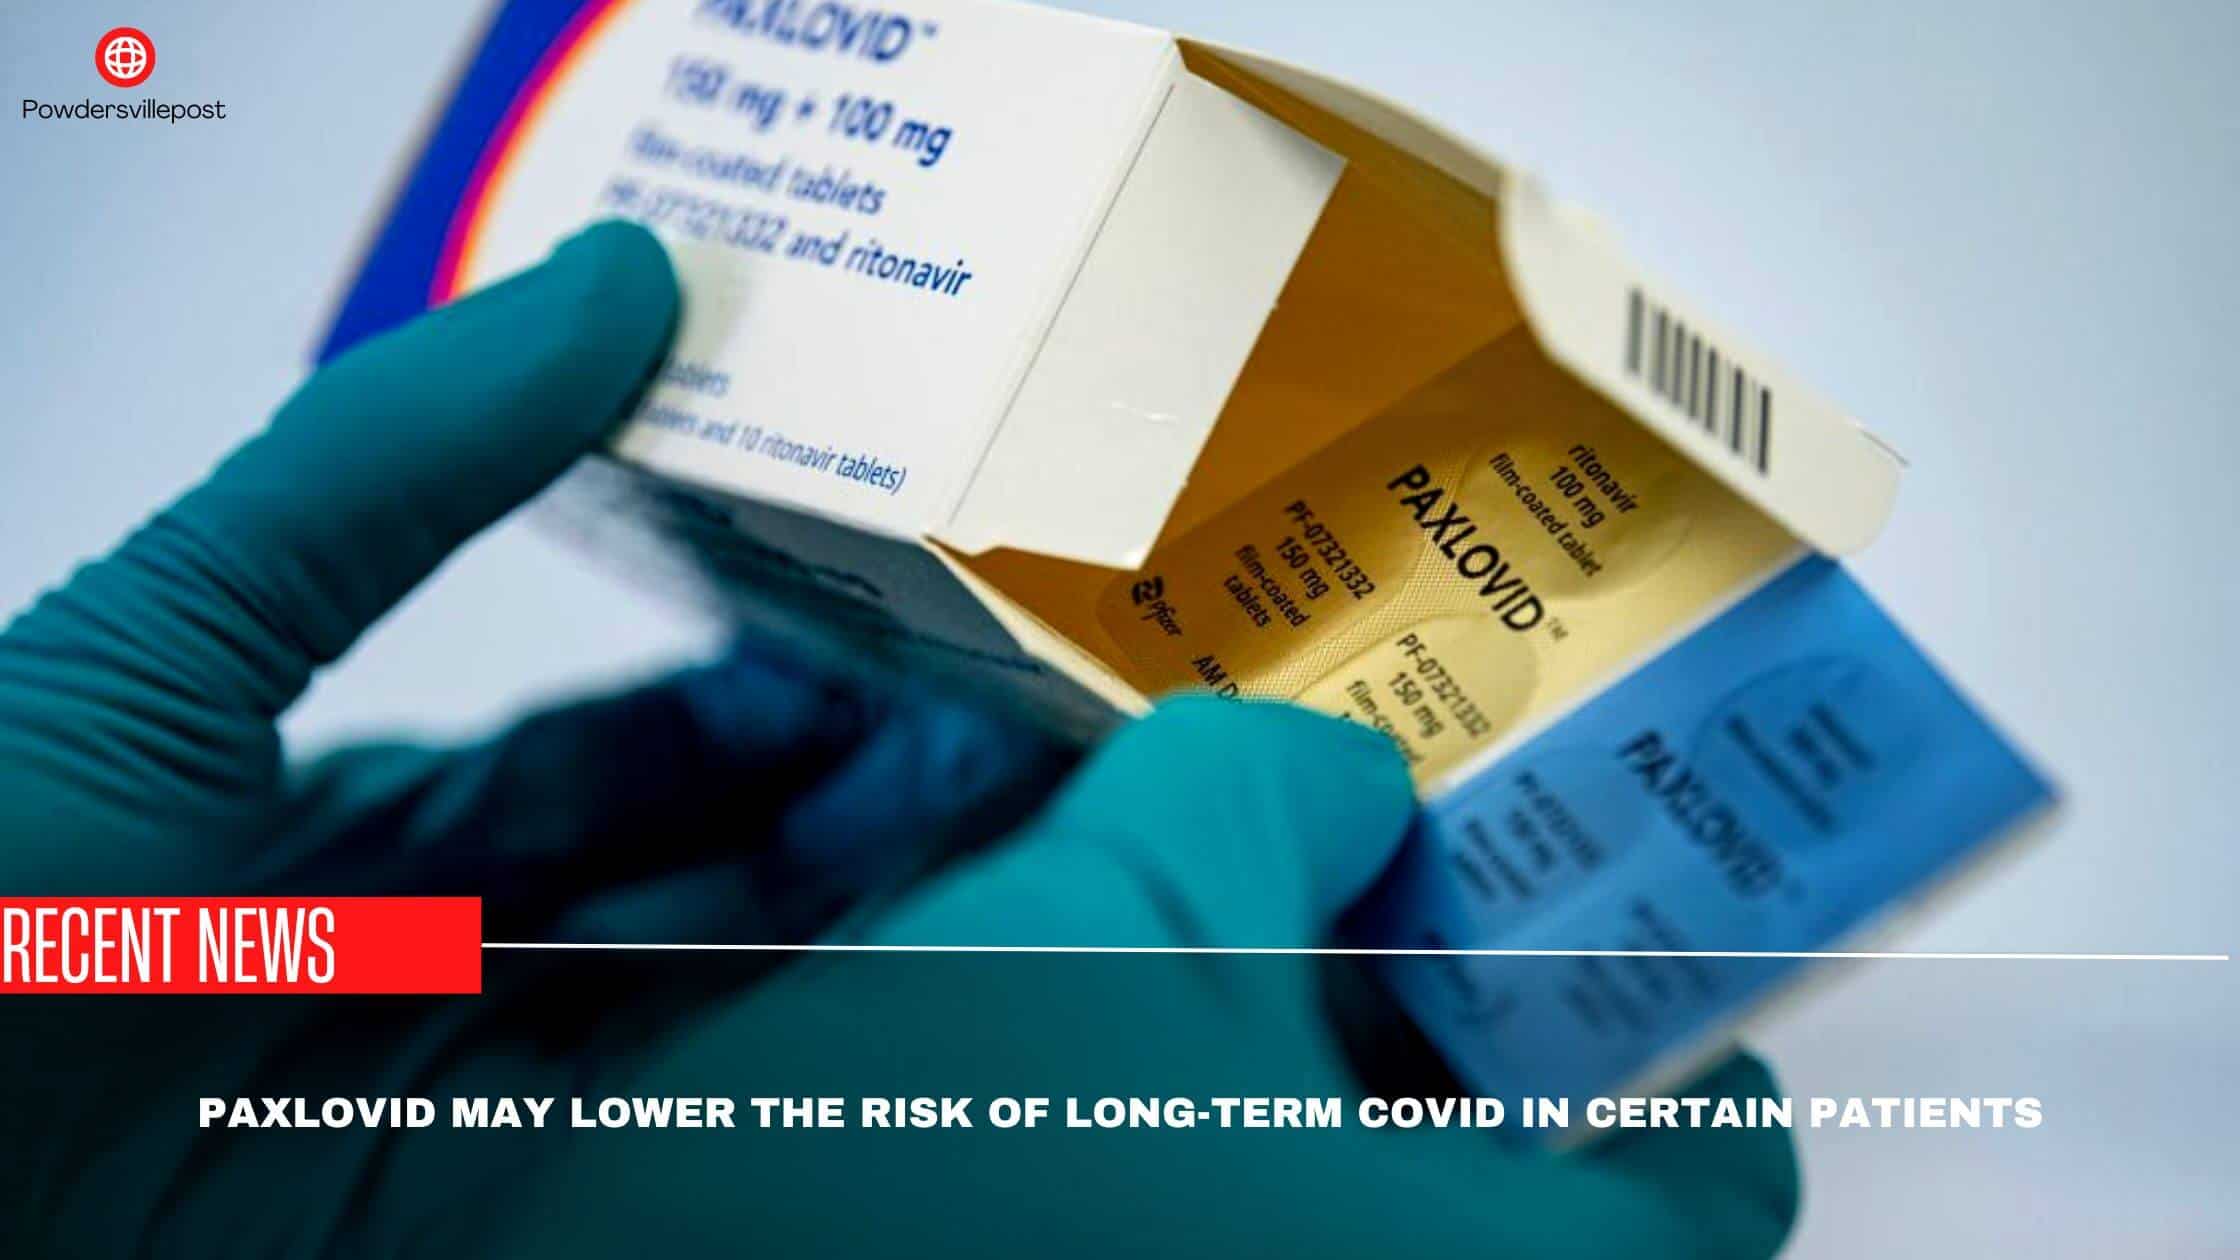 Paxlovid May Lower The Risk Of Long-Term Covid In Certain Patients- Study Says